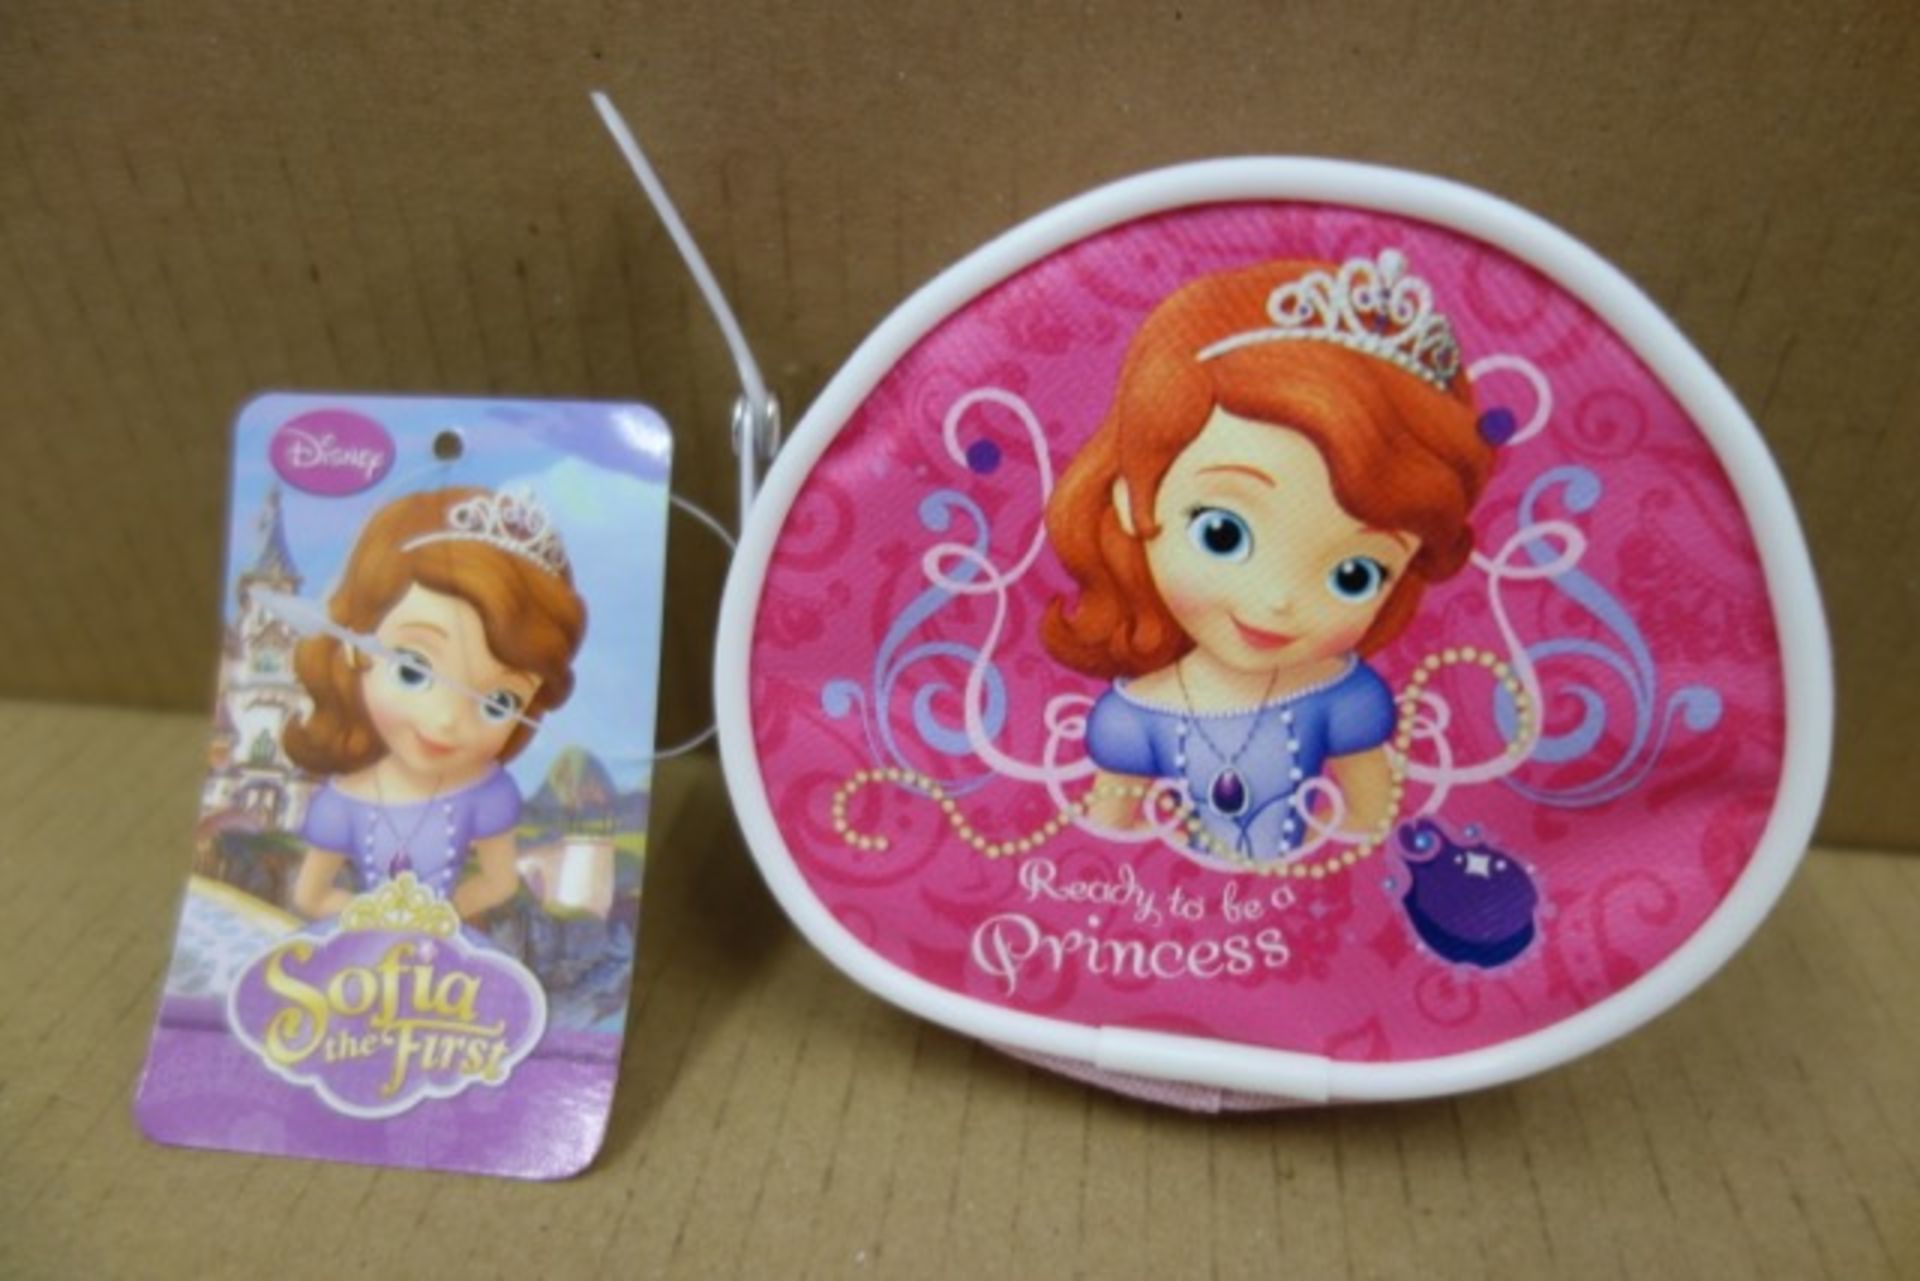 144 x Disney Sofia the First Coin Purse's. 'Ready to be a Princess'. RRP £4.99 each, giving this lot - Image 2 of 2